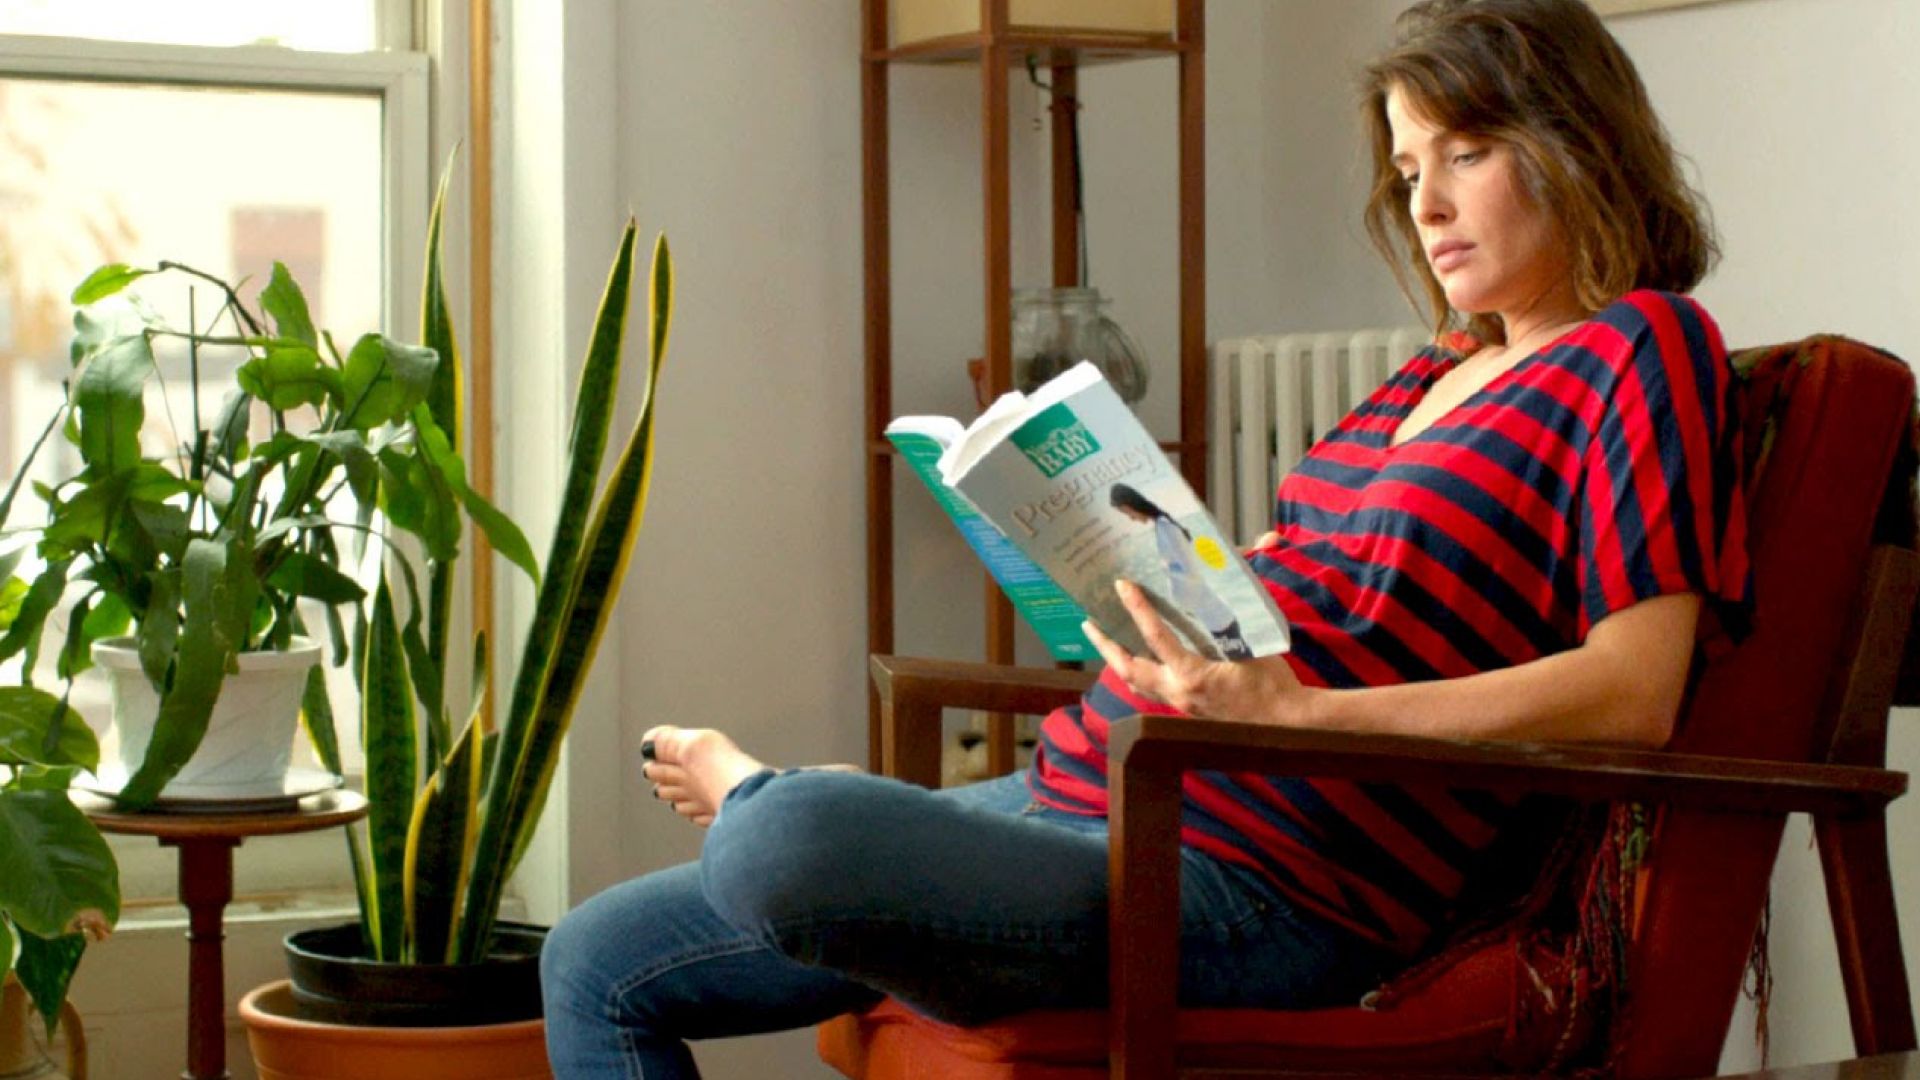 Cobie Smulders has to deal with becoming a mom in new trailer for Sundance film Unexpected